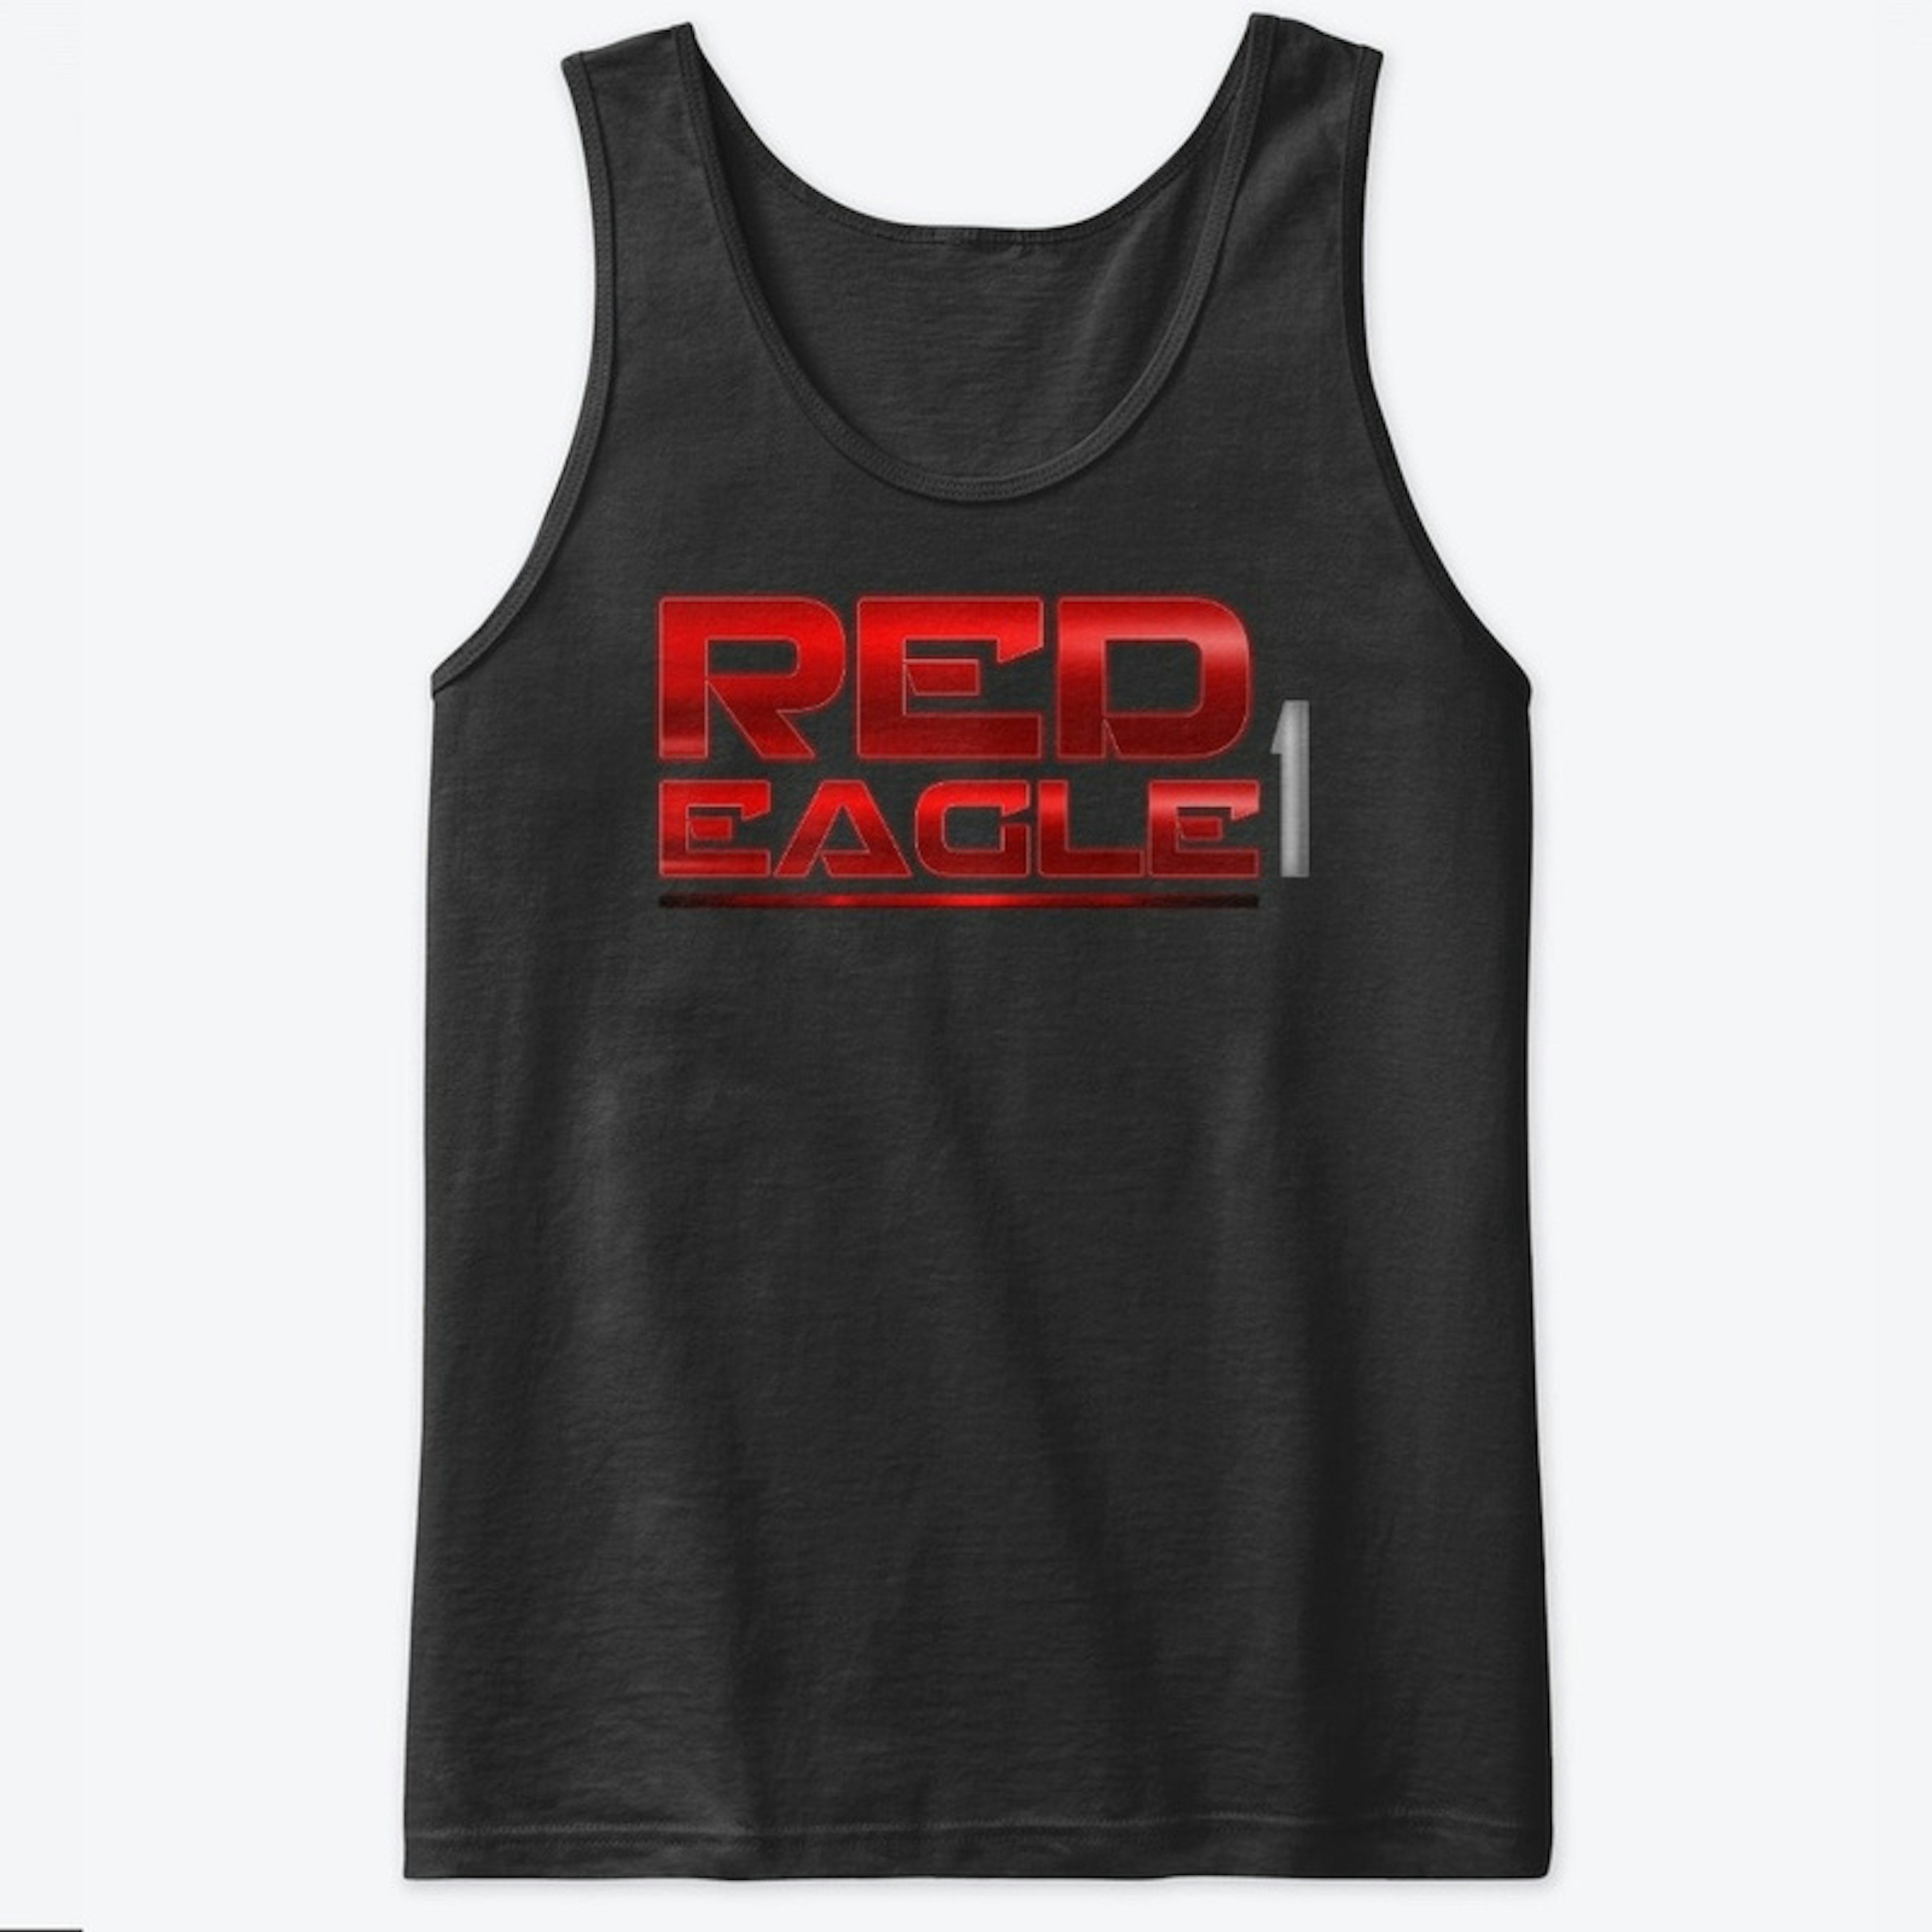 Red Eagle-1